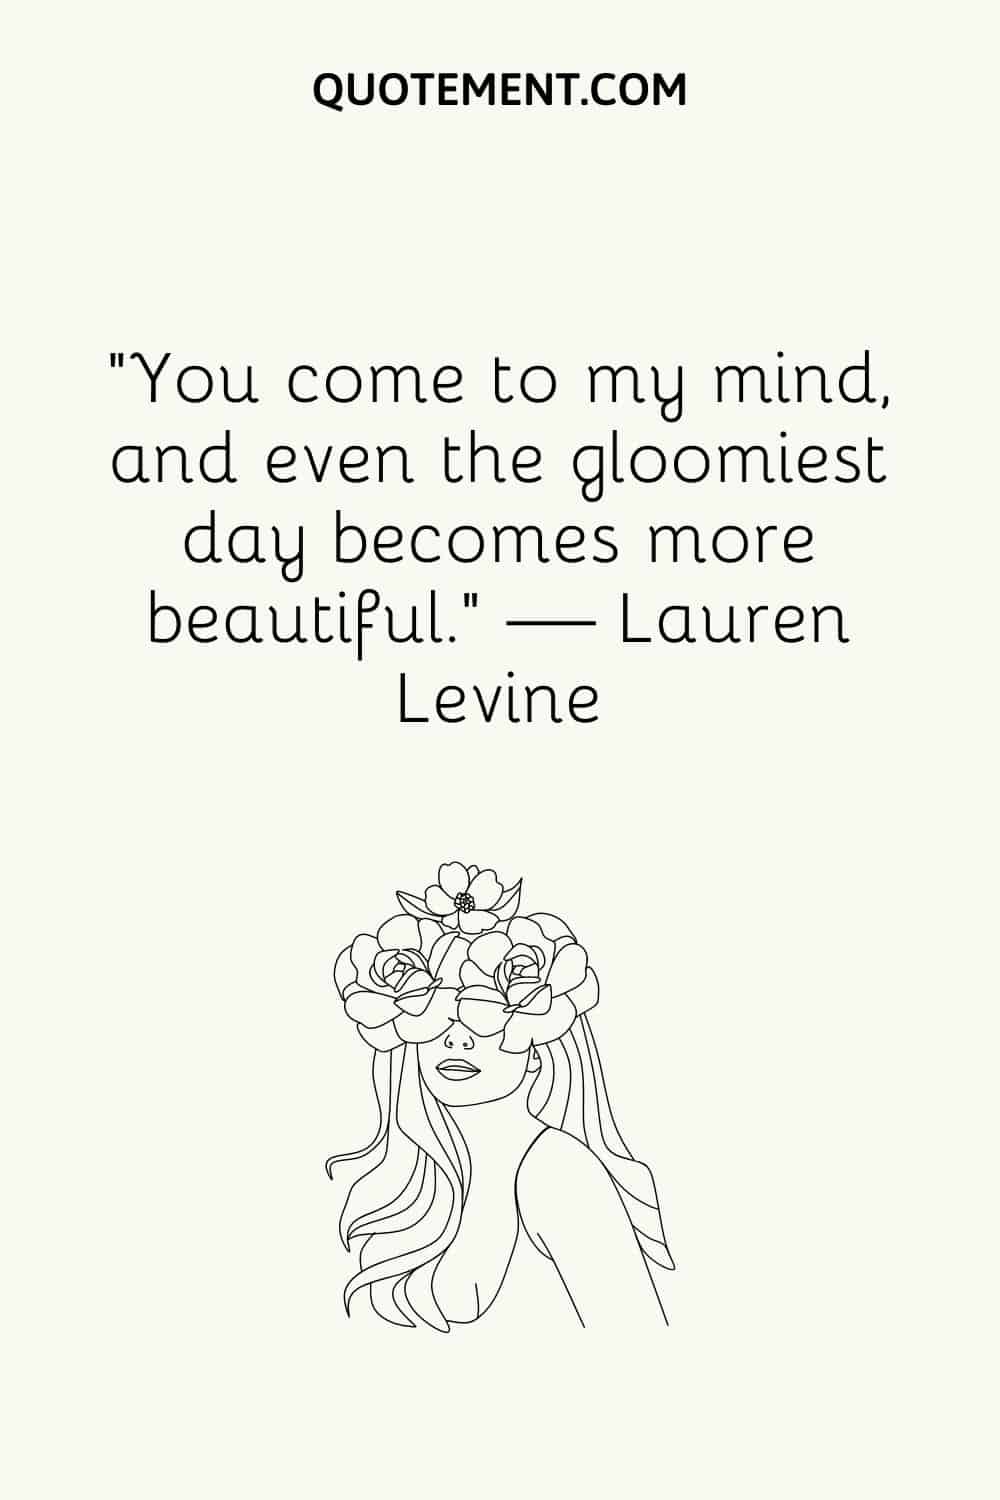 “You come to my mind, and even the gloomiest day becomes more beautiful.” — Lauren Levine